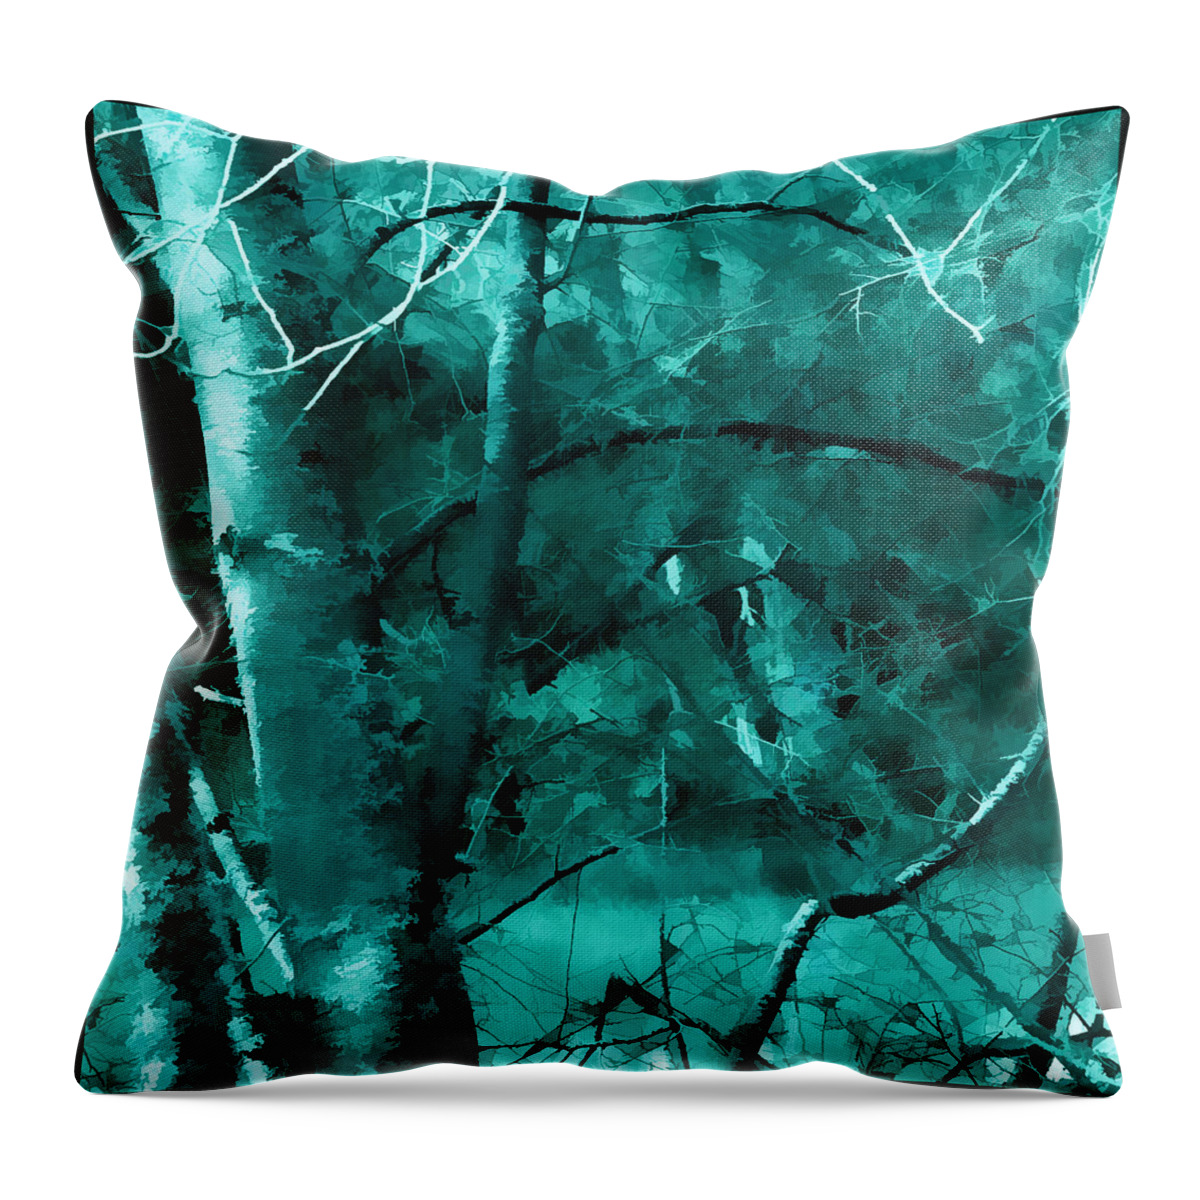 Digital Throw Pillow featuring the photograph Turquoise Branches by Bonnie Bruno